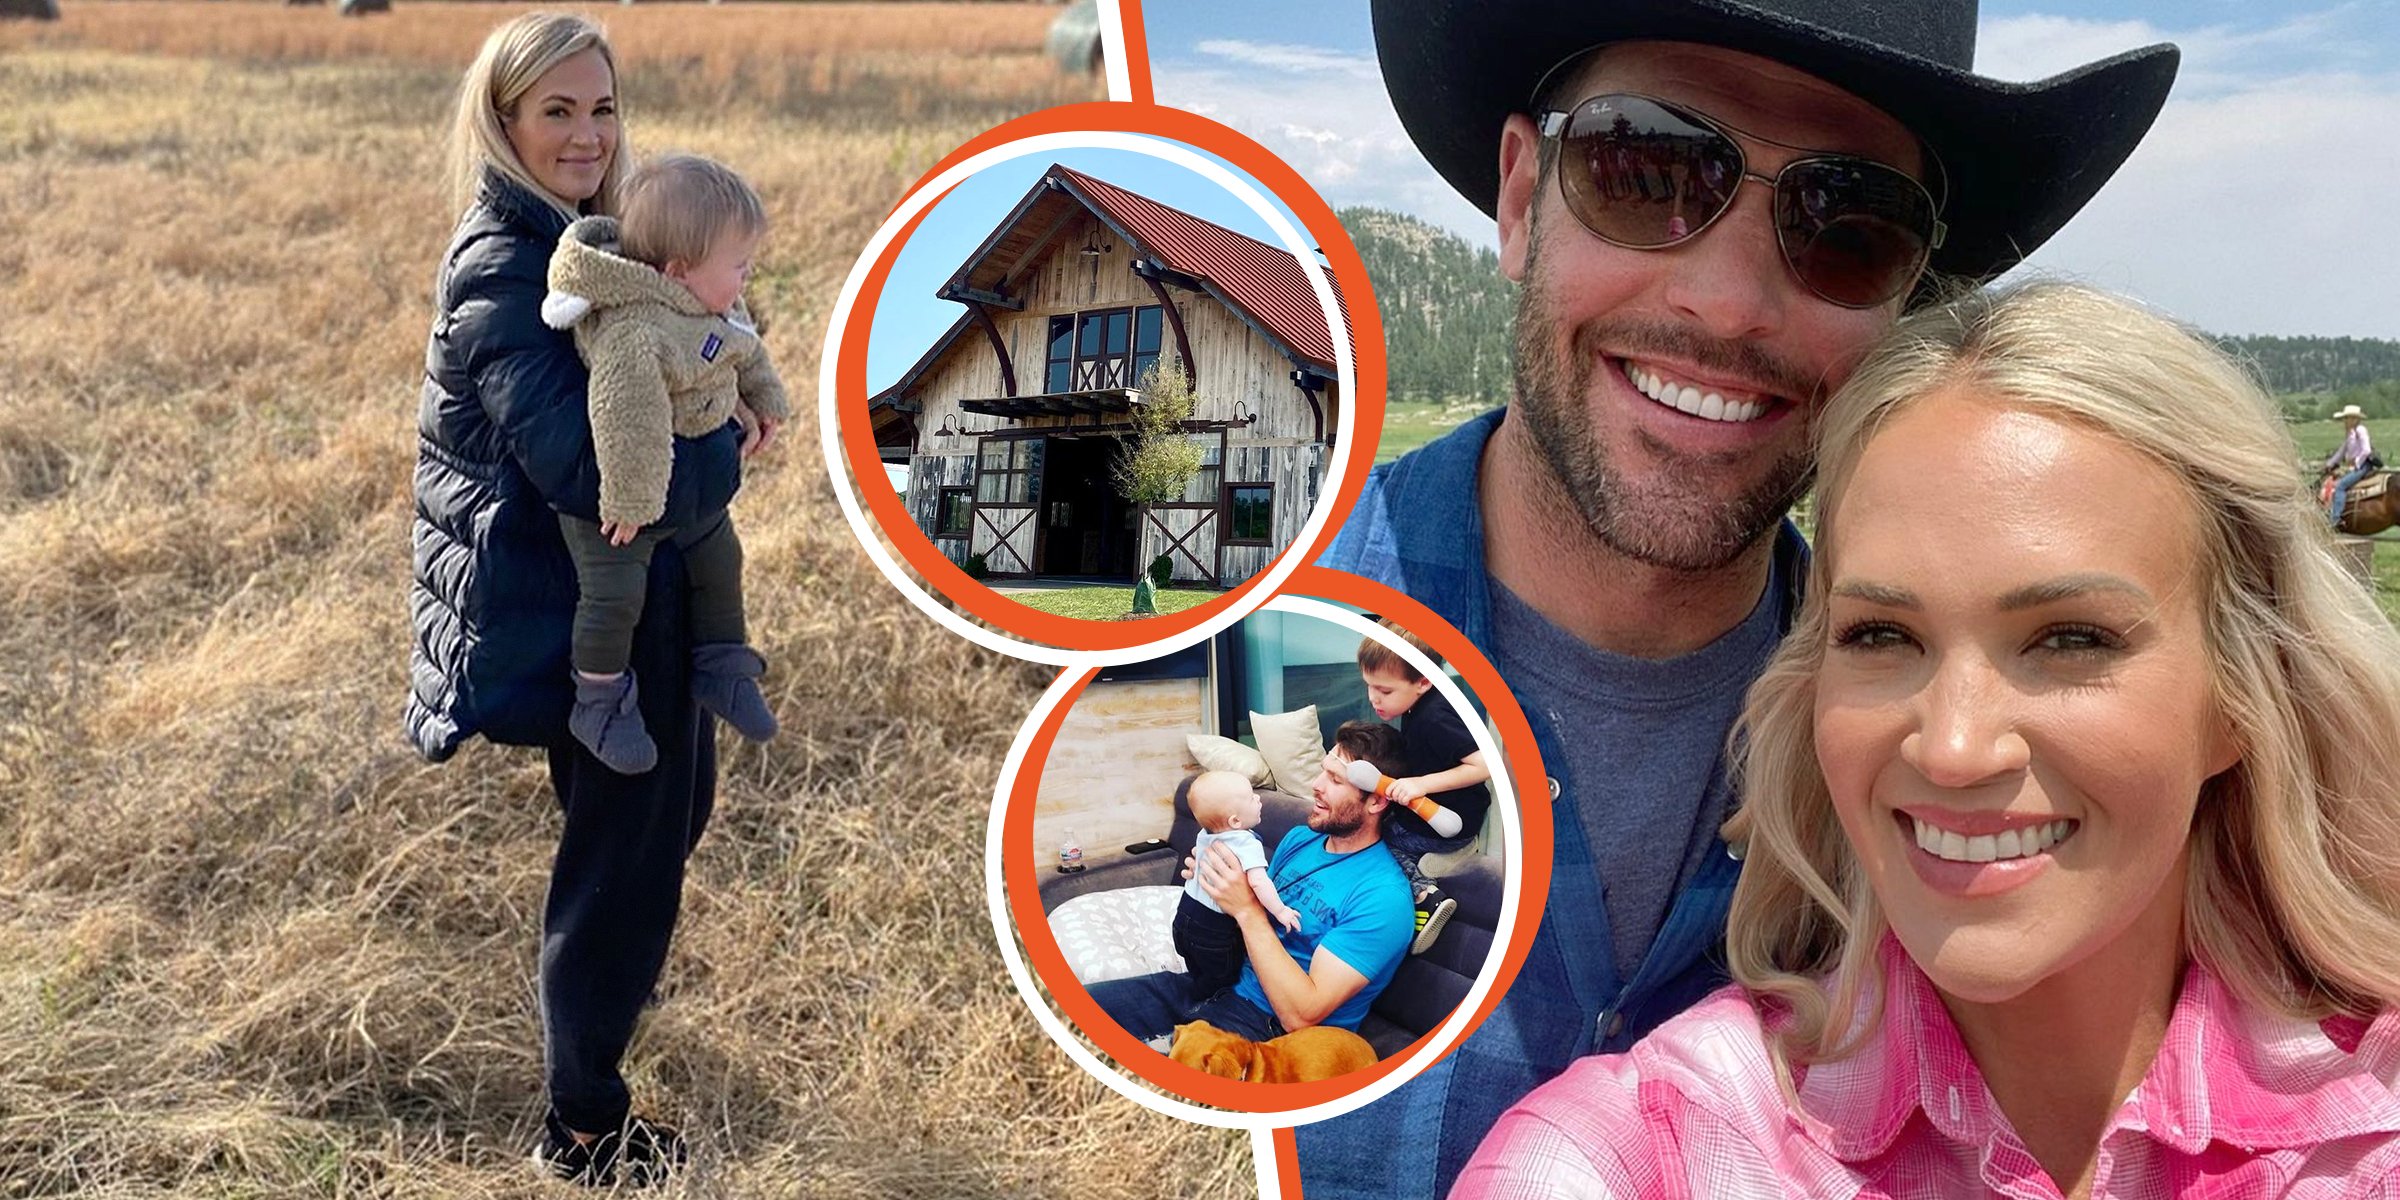 Carrie Underwood with her son | Her Nashville home [Inset] | Mike Fisher with their son | Underwood and Mike Fisher | Source: Instagram.com/carrieunderwood | Instagram.com/mfisher1212